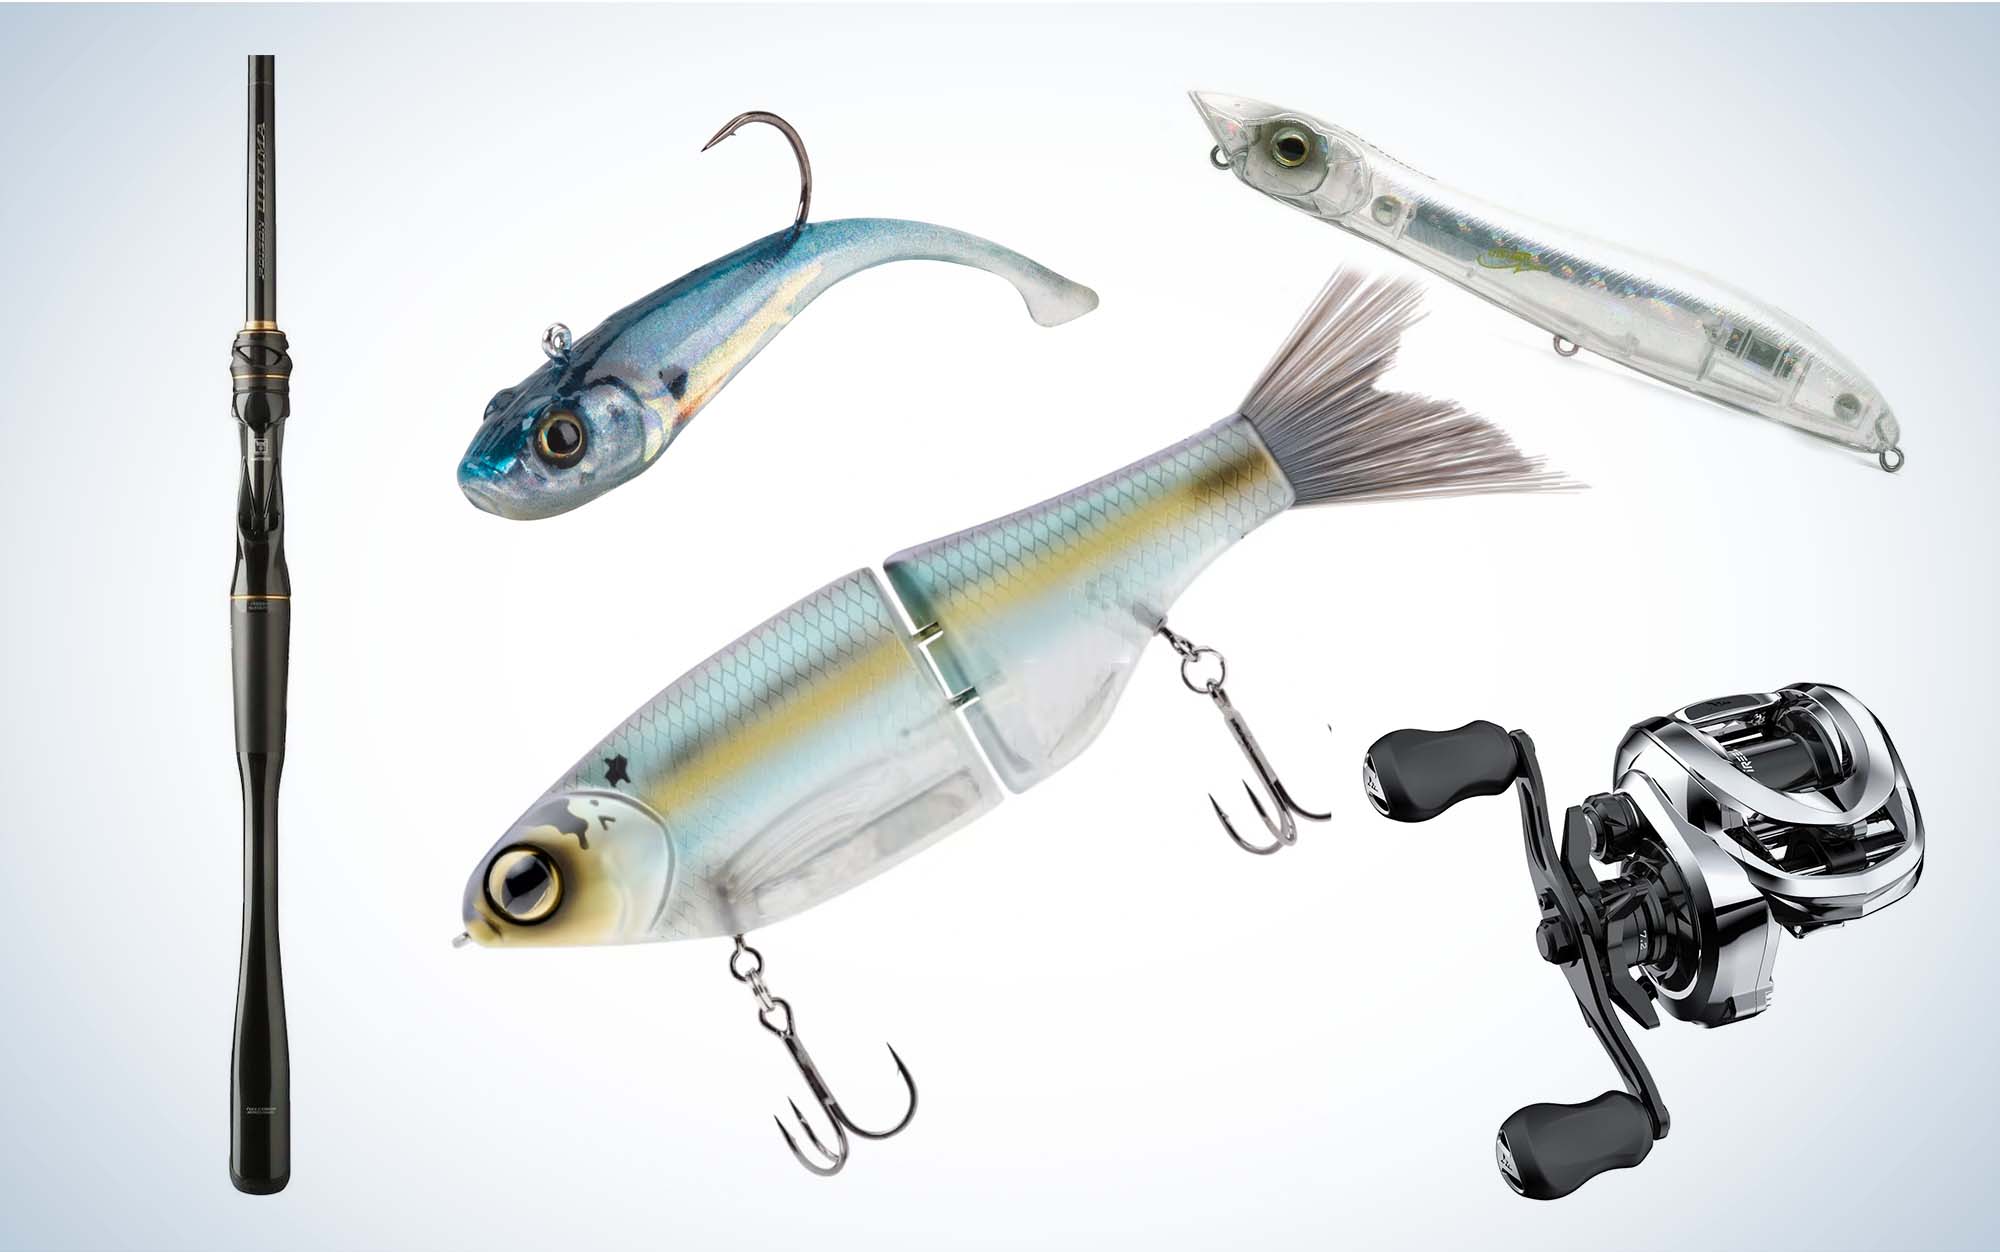 Hot new products at ICAST 2019 - Bassmaster